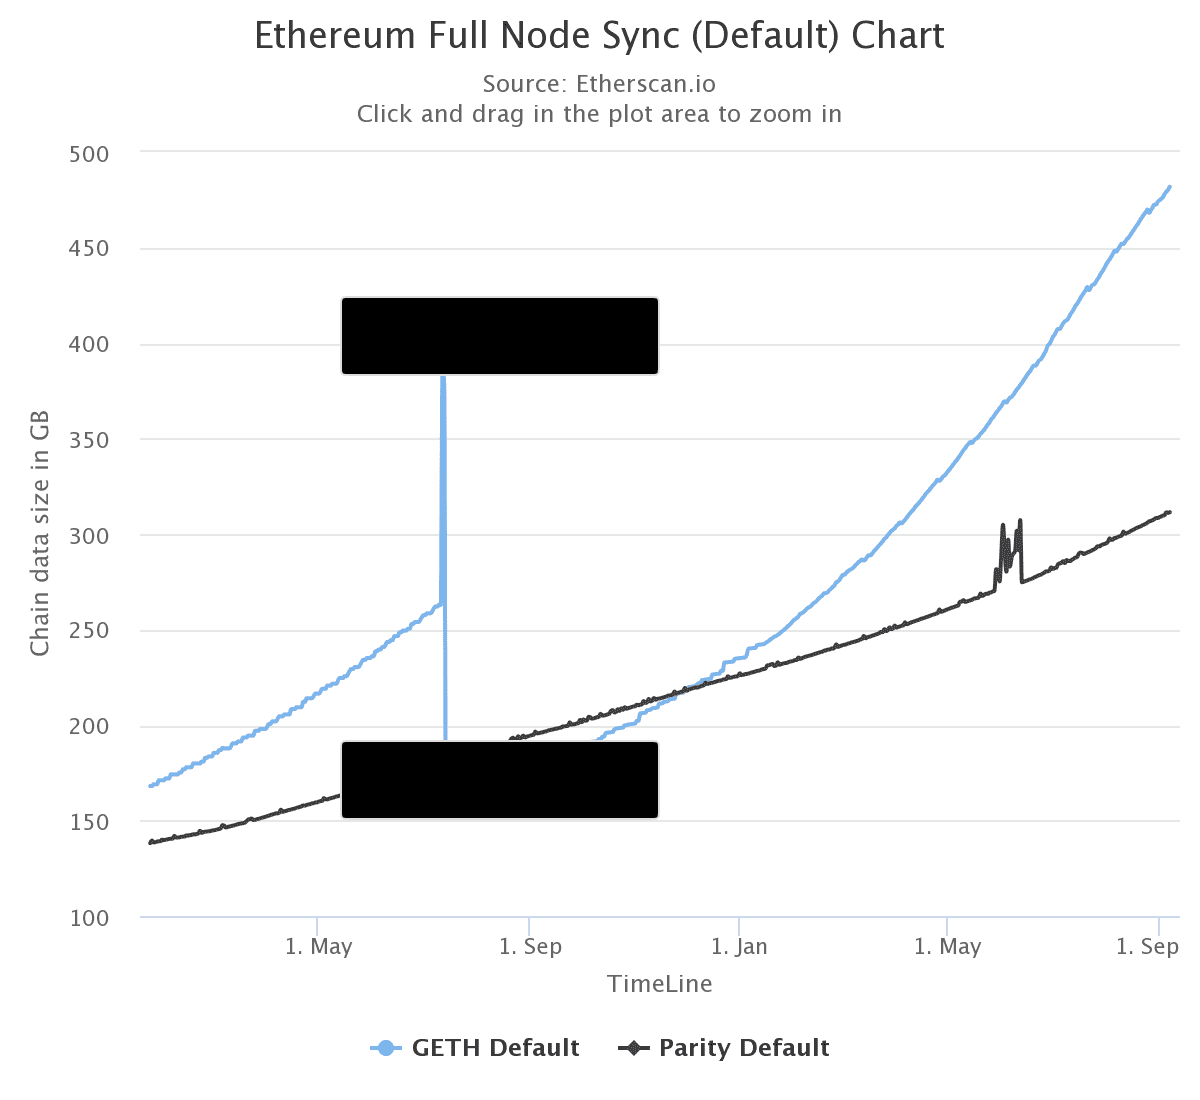 A chart showing that GB needed for a full sync is trending up